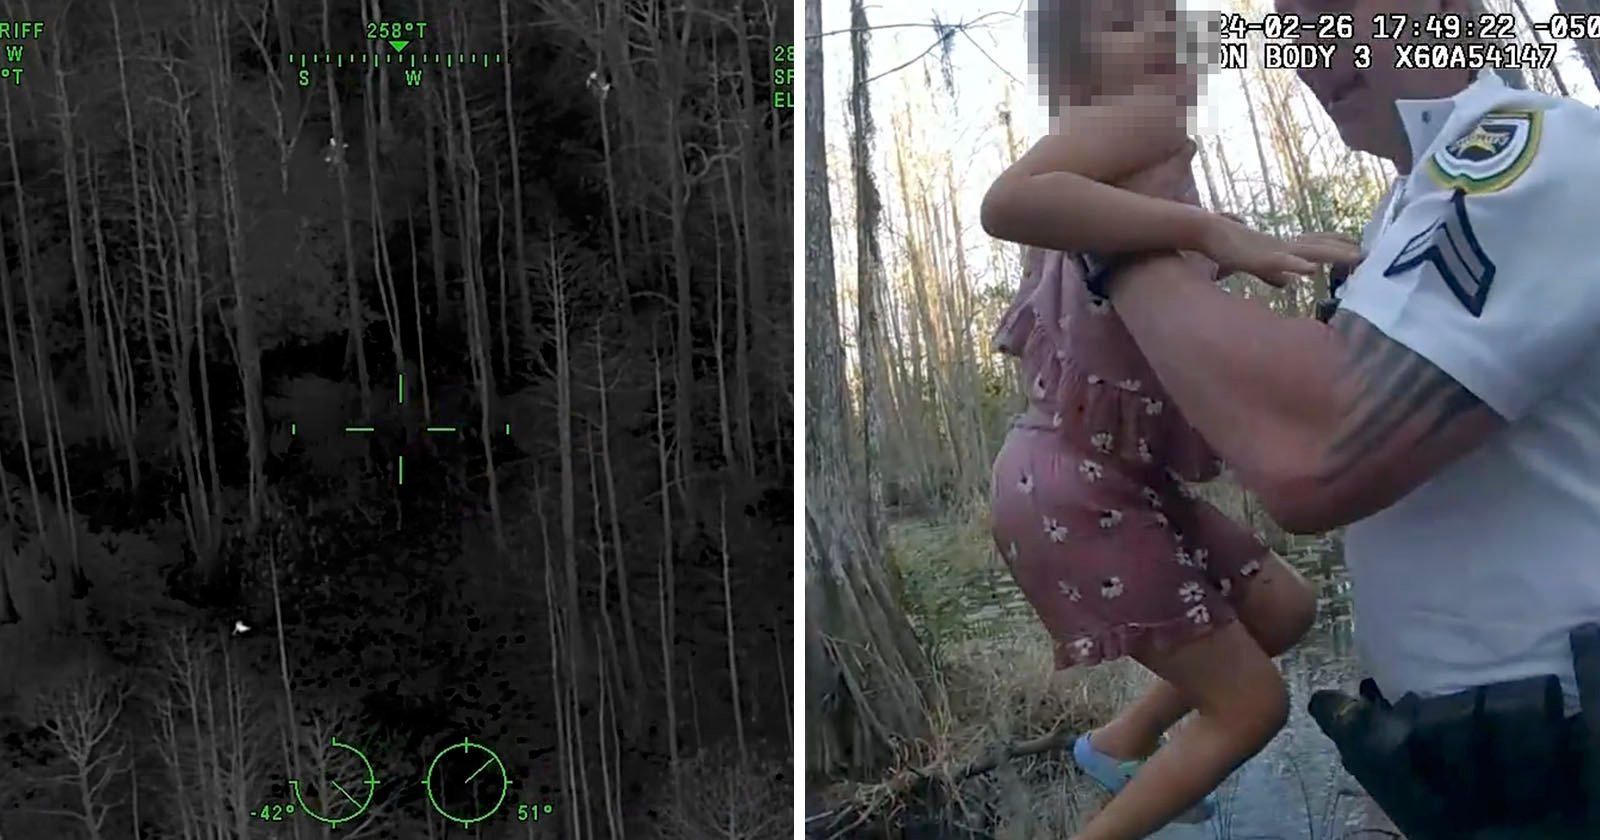 Thermal Camera Helps Deputies Find, Rescue Missing Child in Swampland